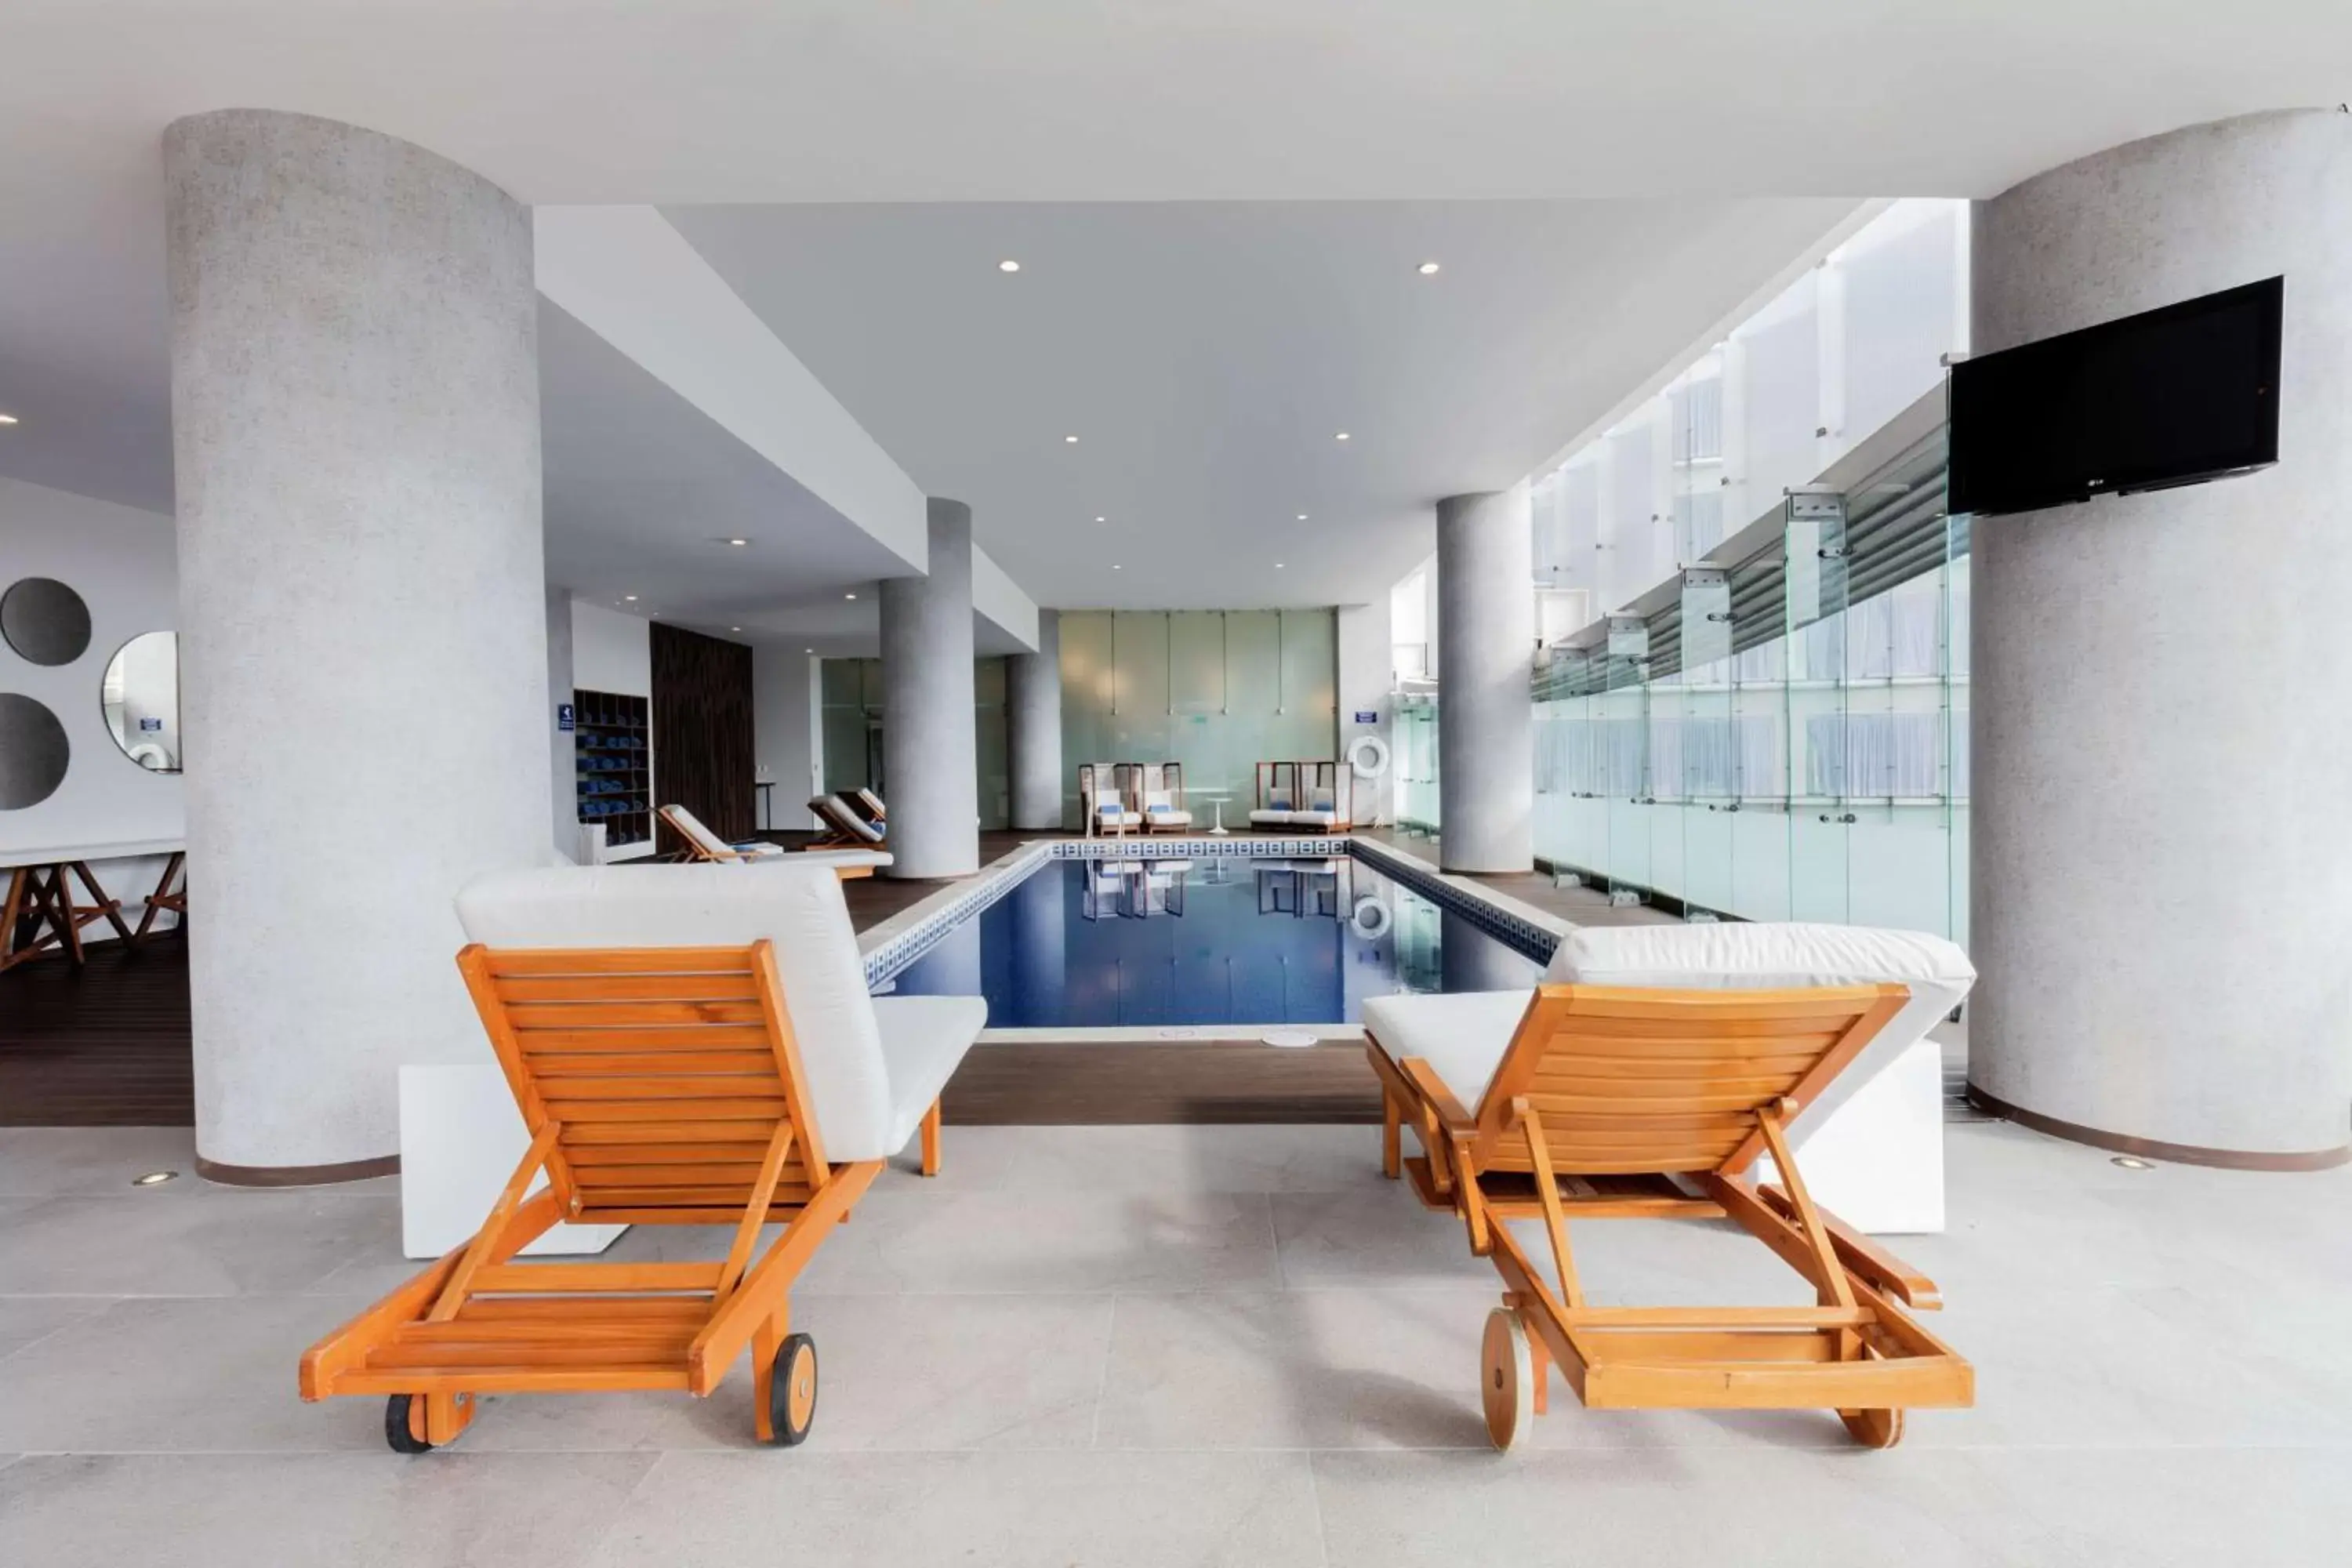 Swimming pool in Doubletree By Hilton Mexico City Santa Fe